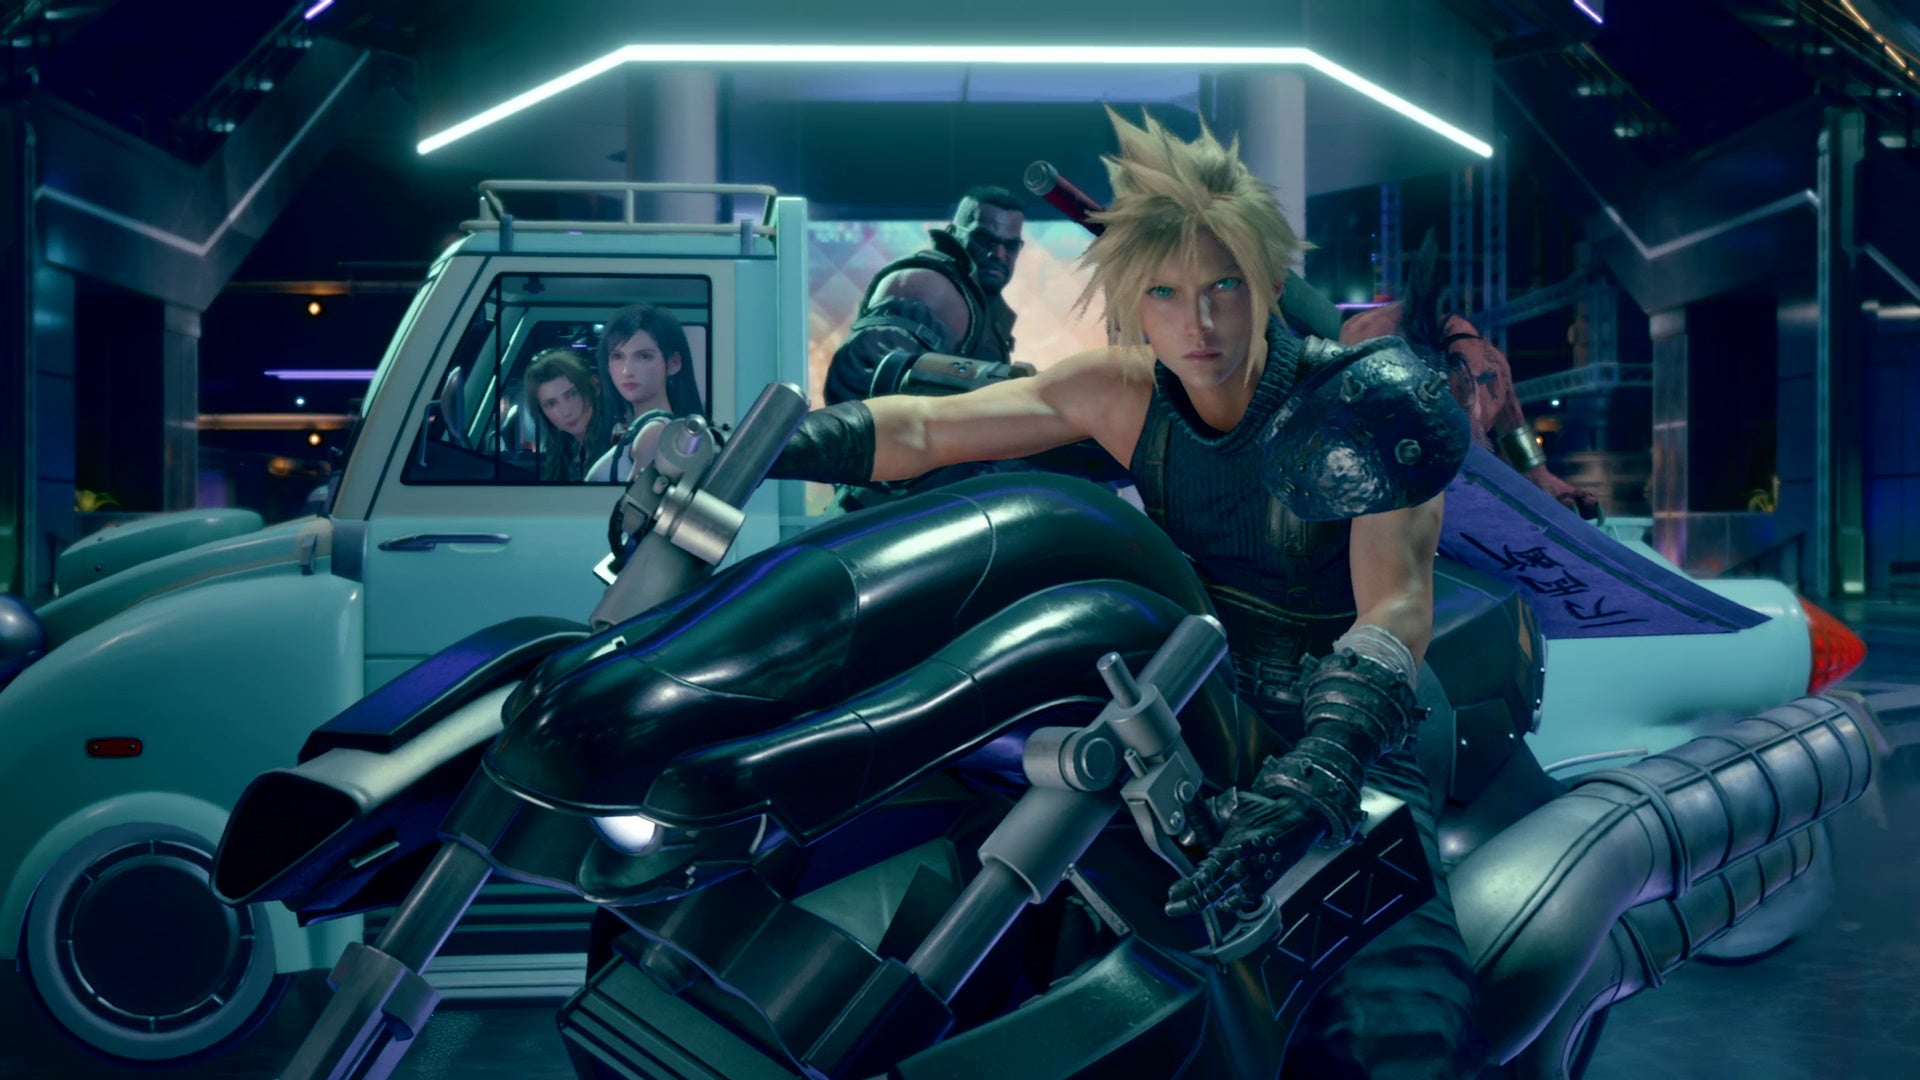 Final Fantasy VII Remake made me fall in love with cutscenes again.